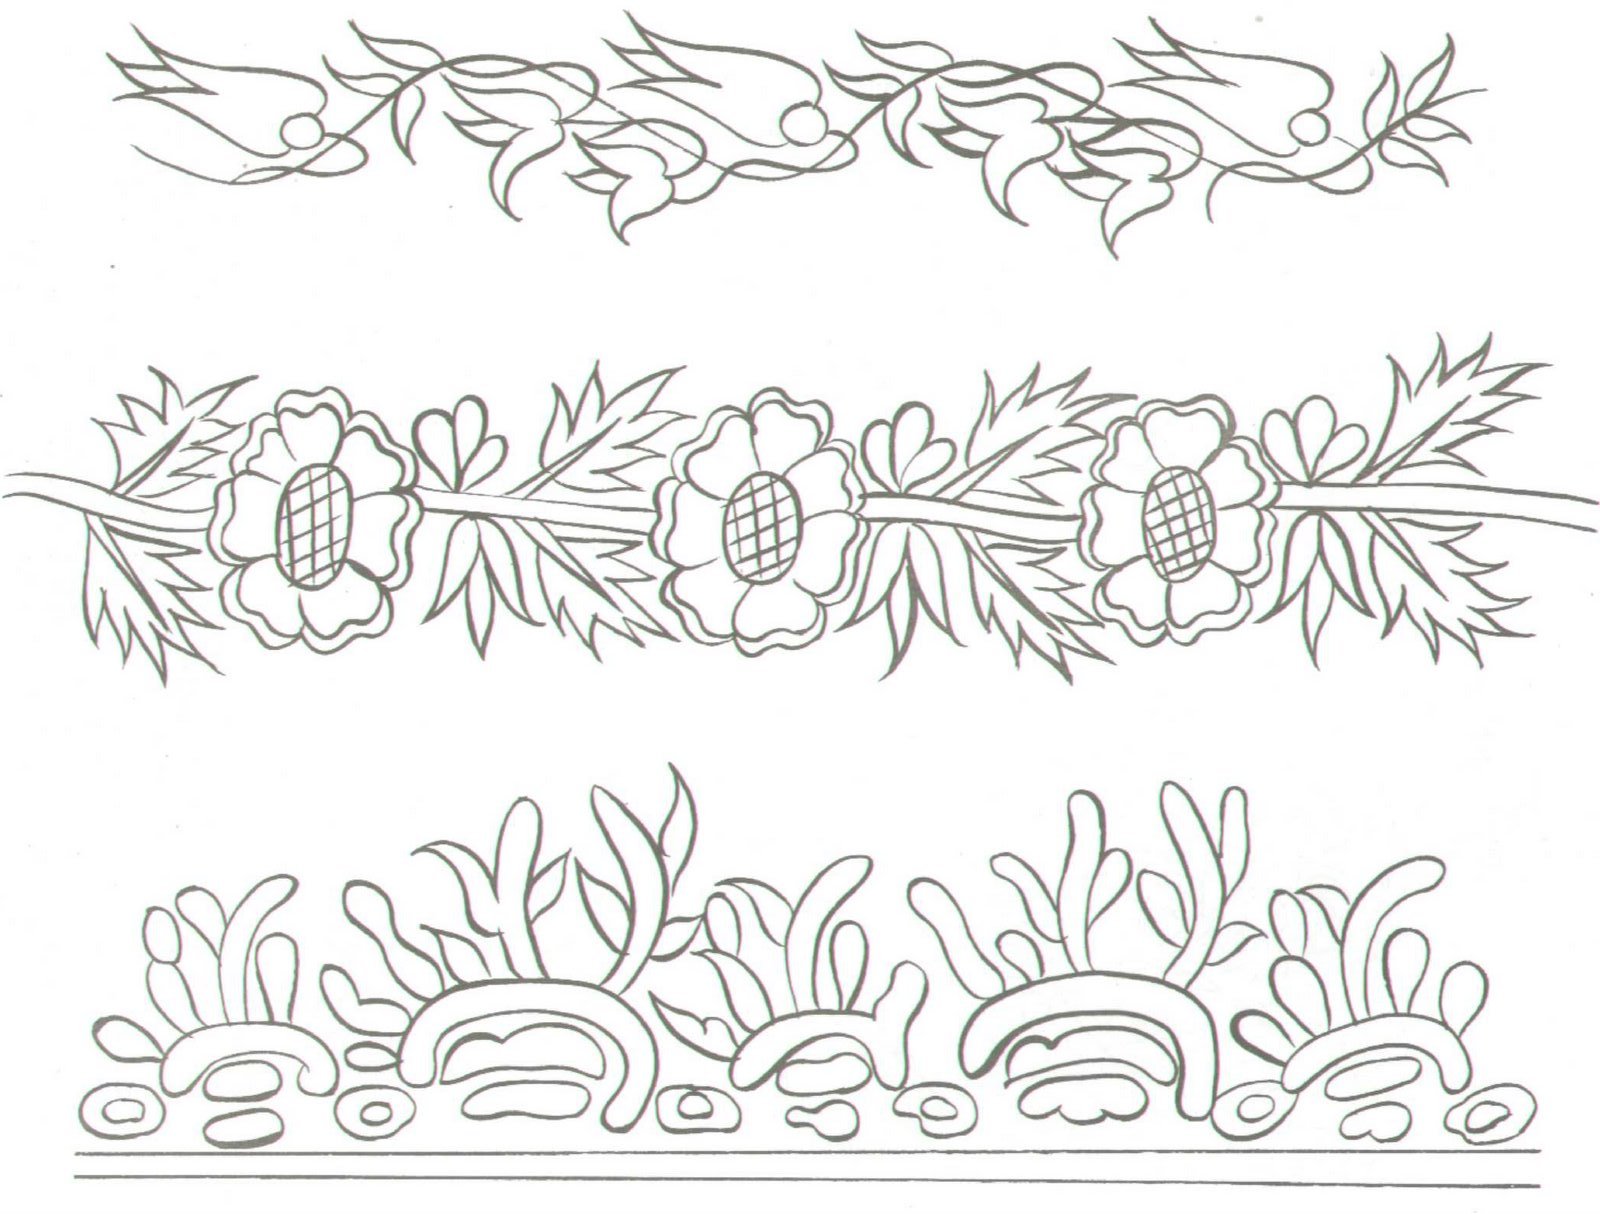 Embroidery design mixed borders